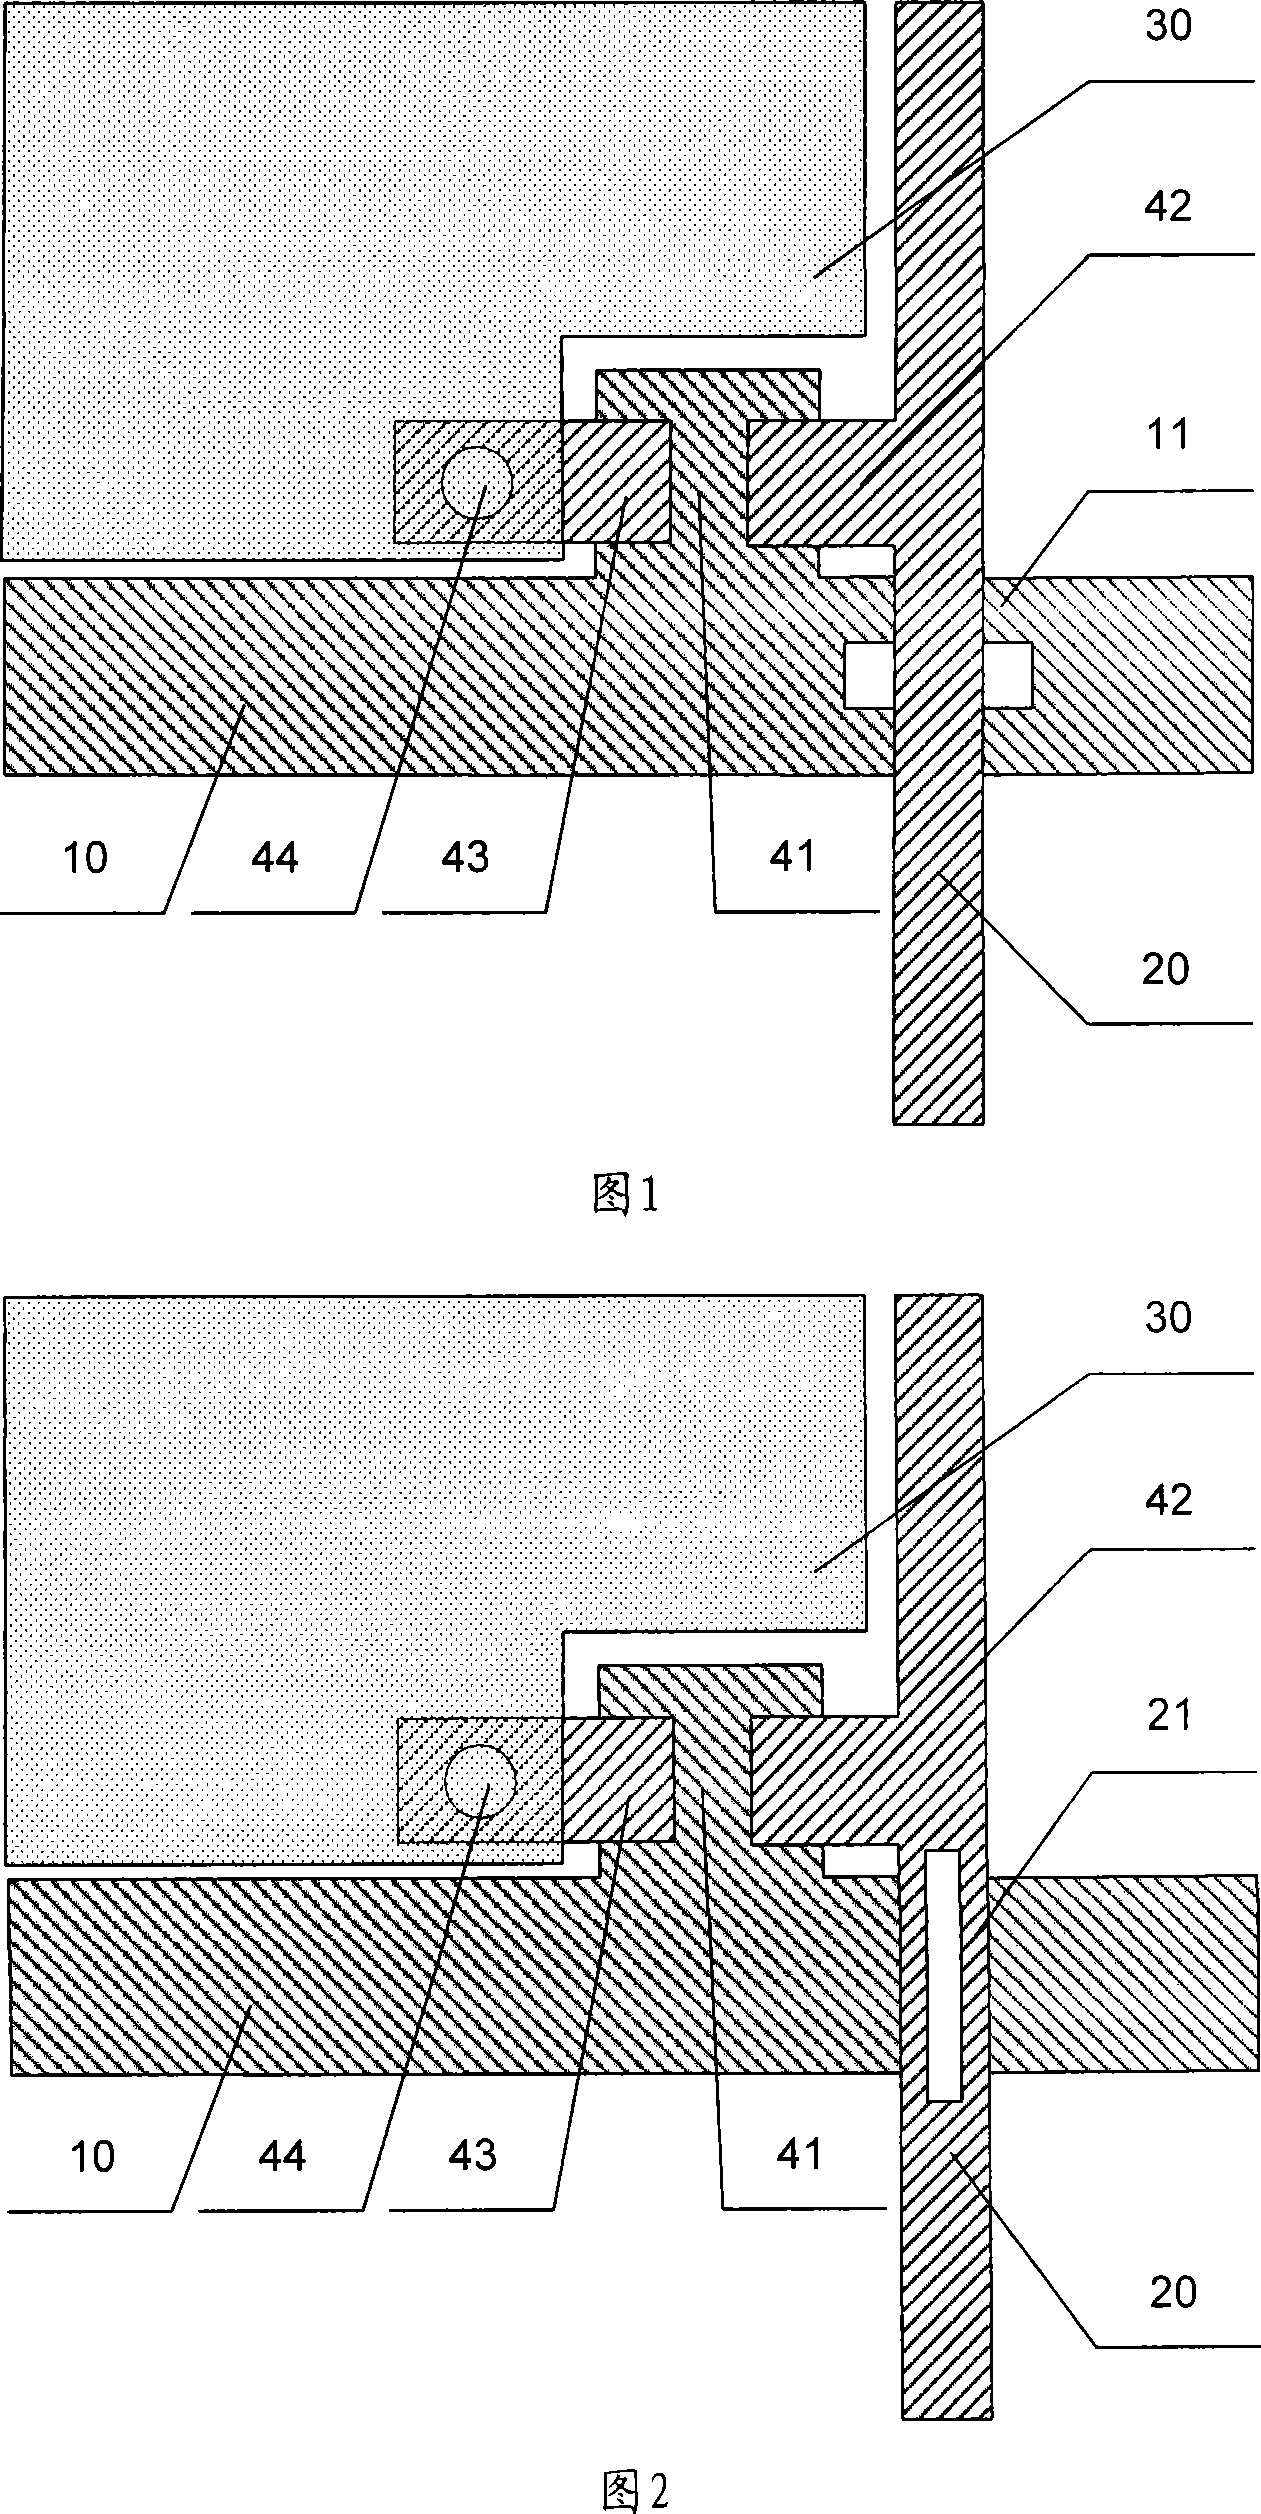 TFT-LCD array substrate